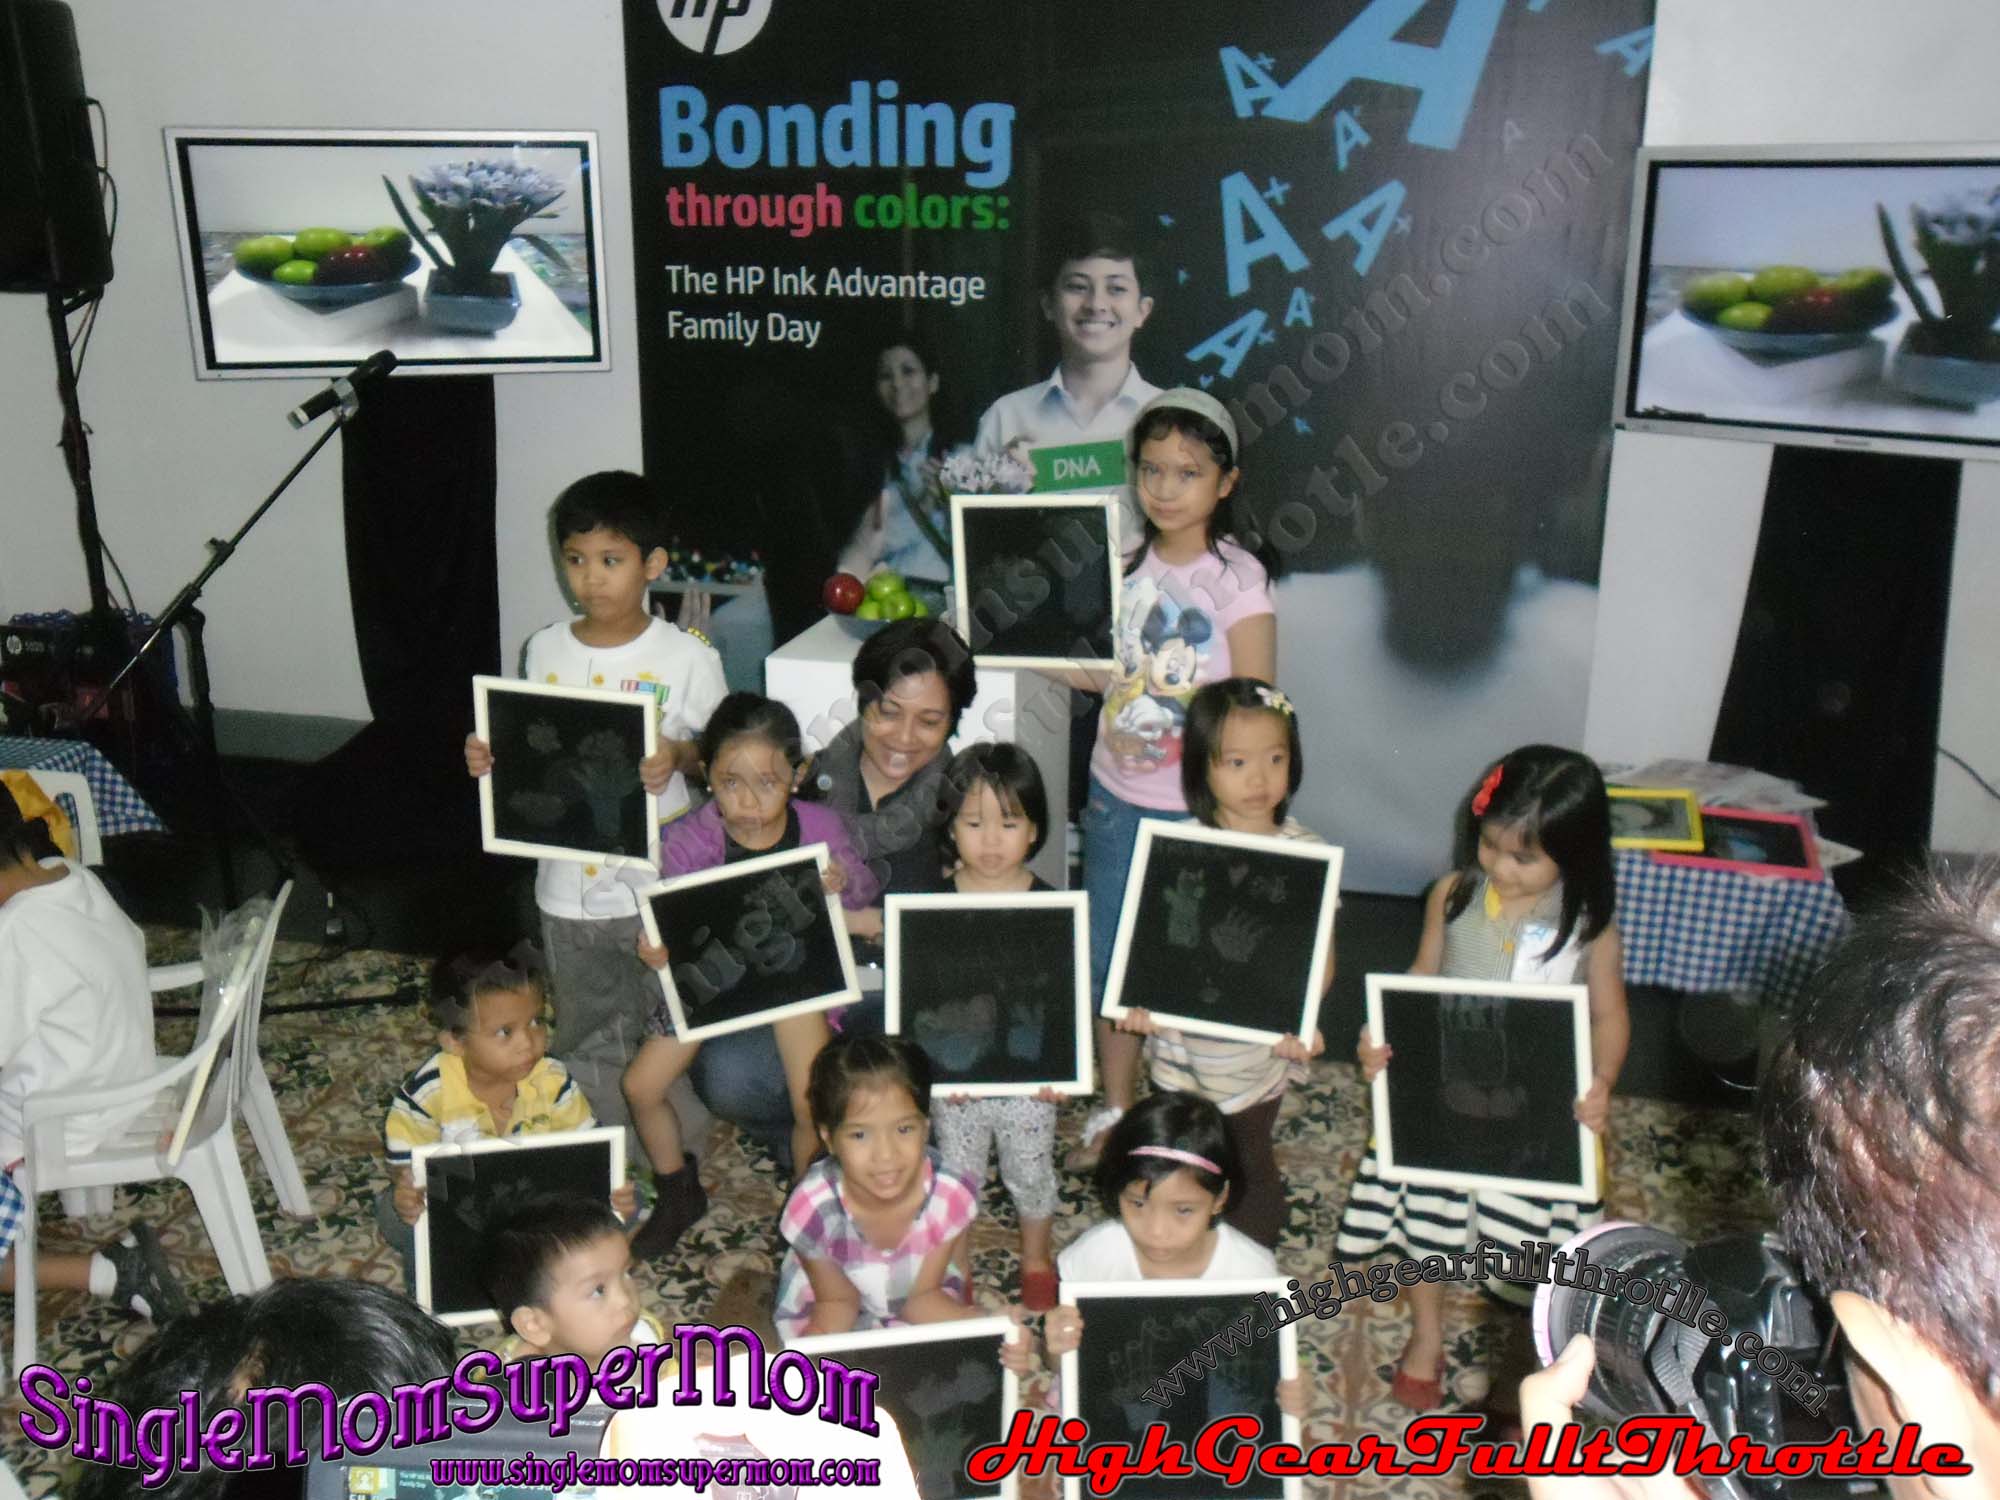 HP Ink Advantage Printers A+ bonding for A+ Families